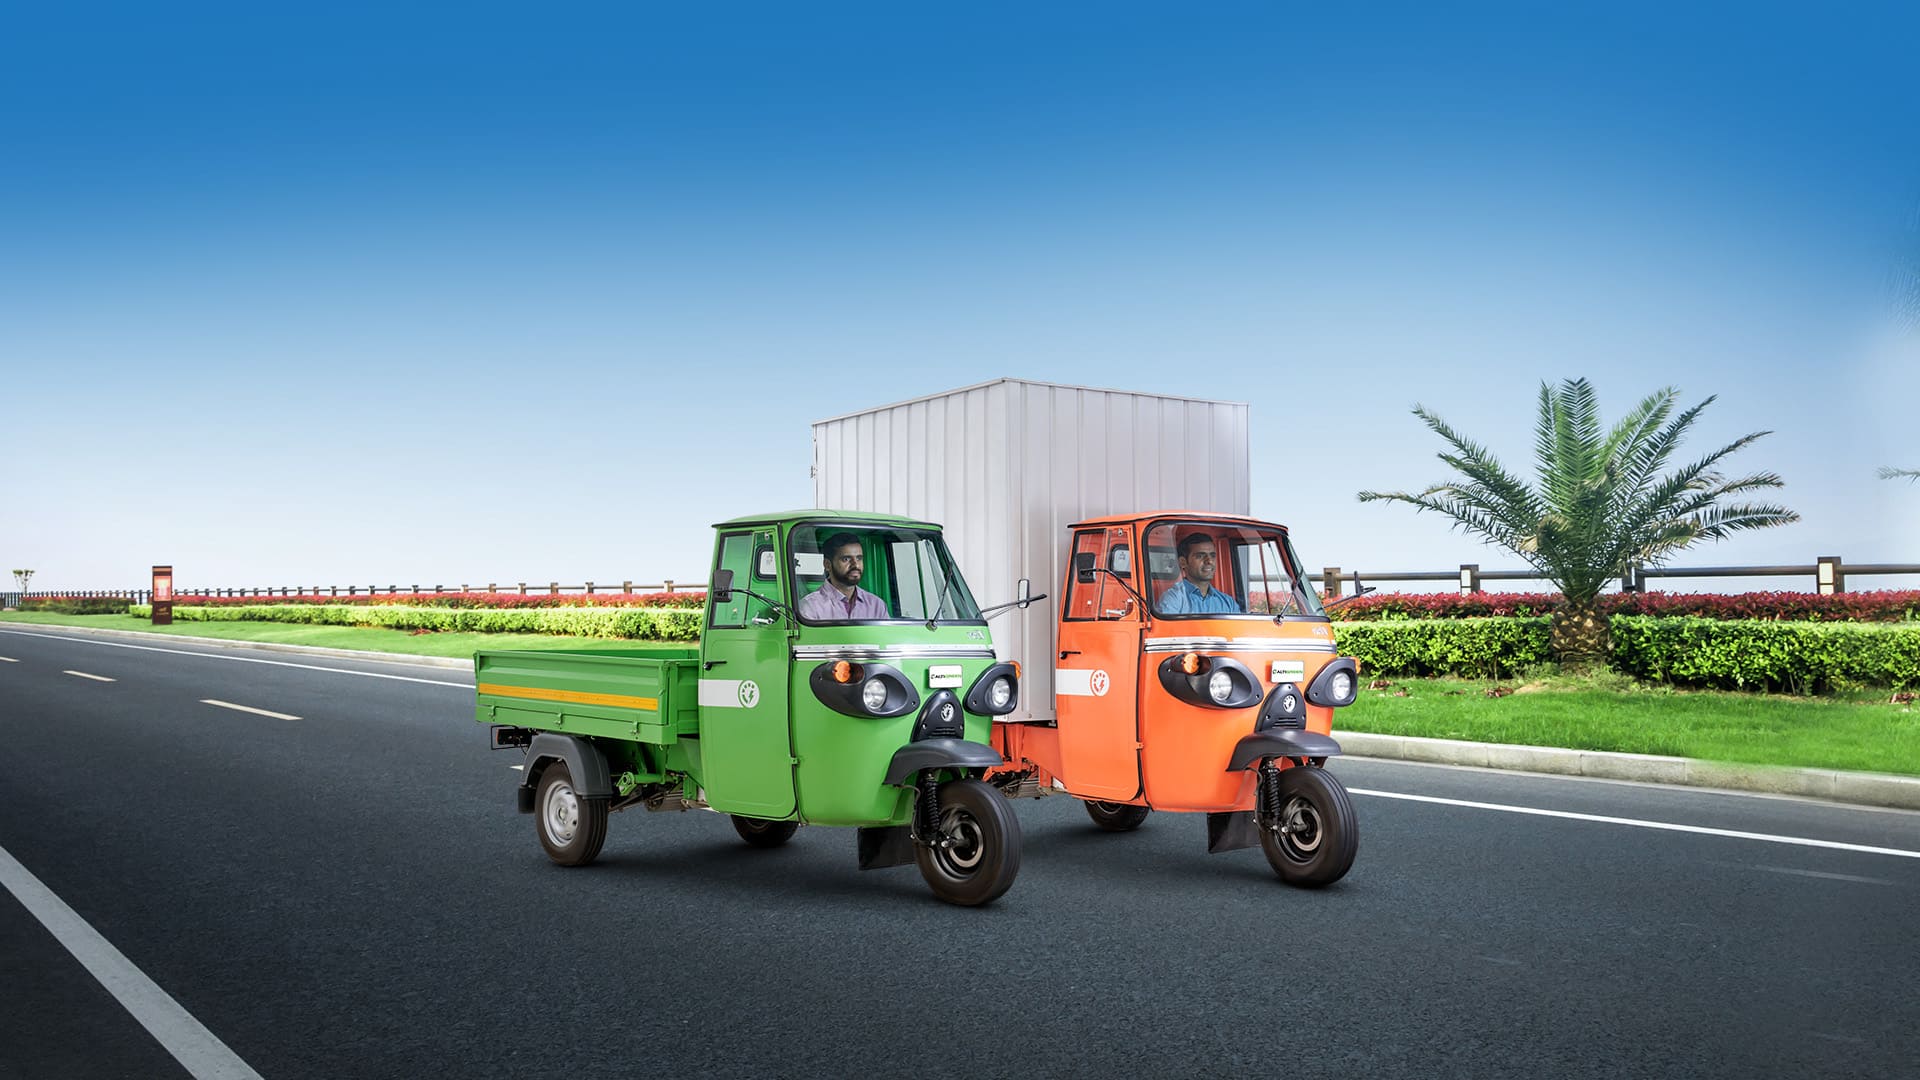 https://e-vehicleinfo.com/neev-tez-electric-three-wheeler-cargo-with-15-minute-rapid-charging/